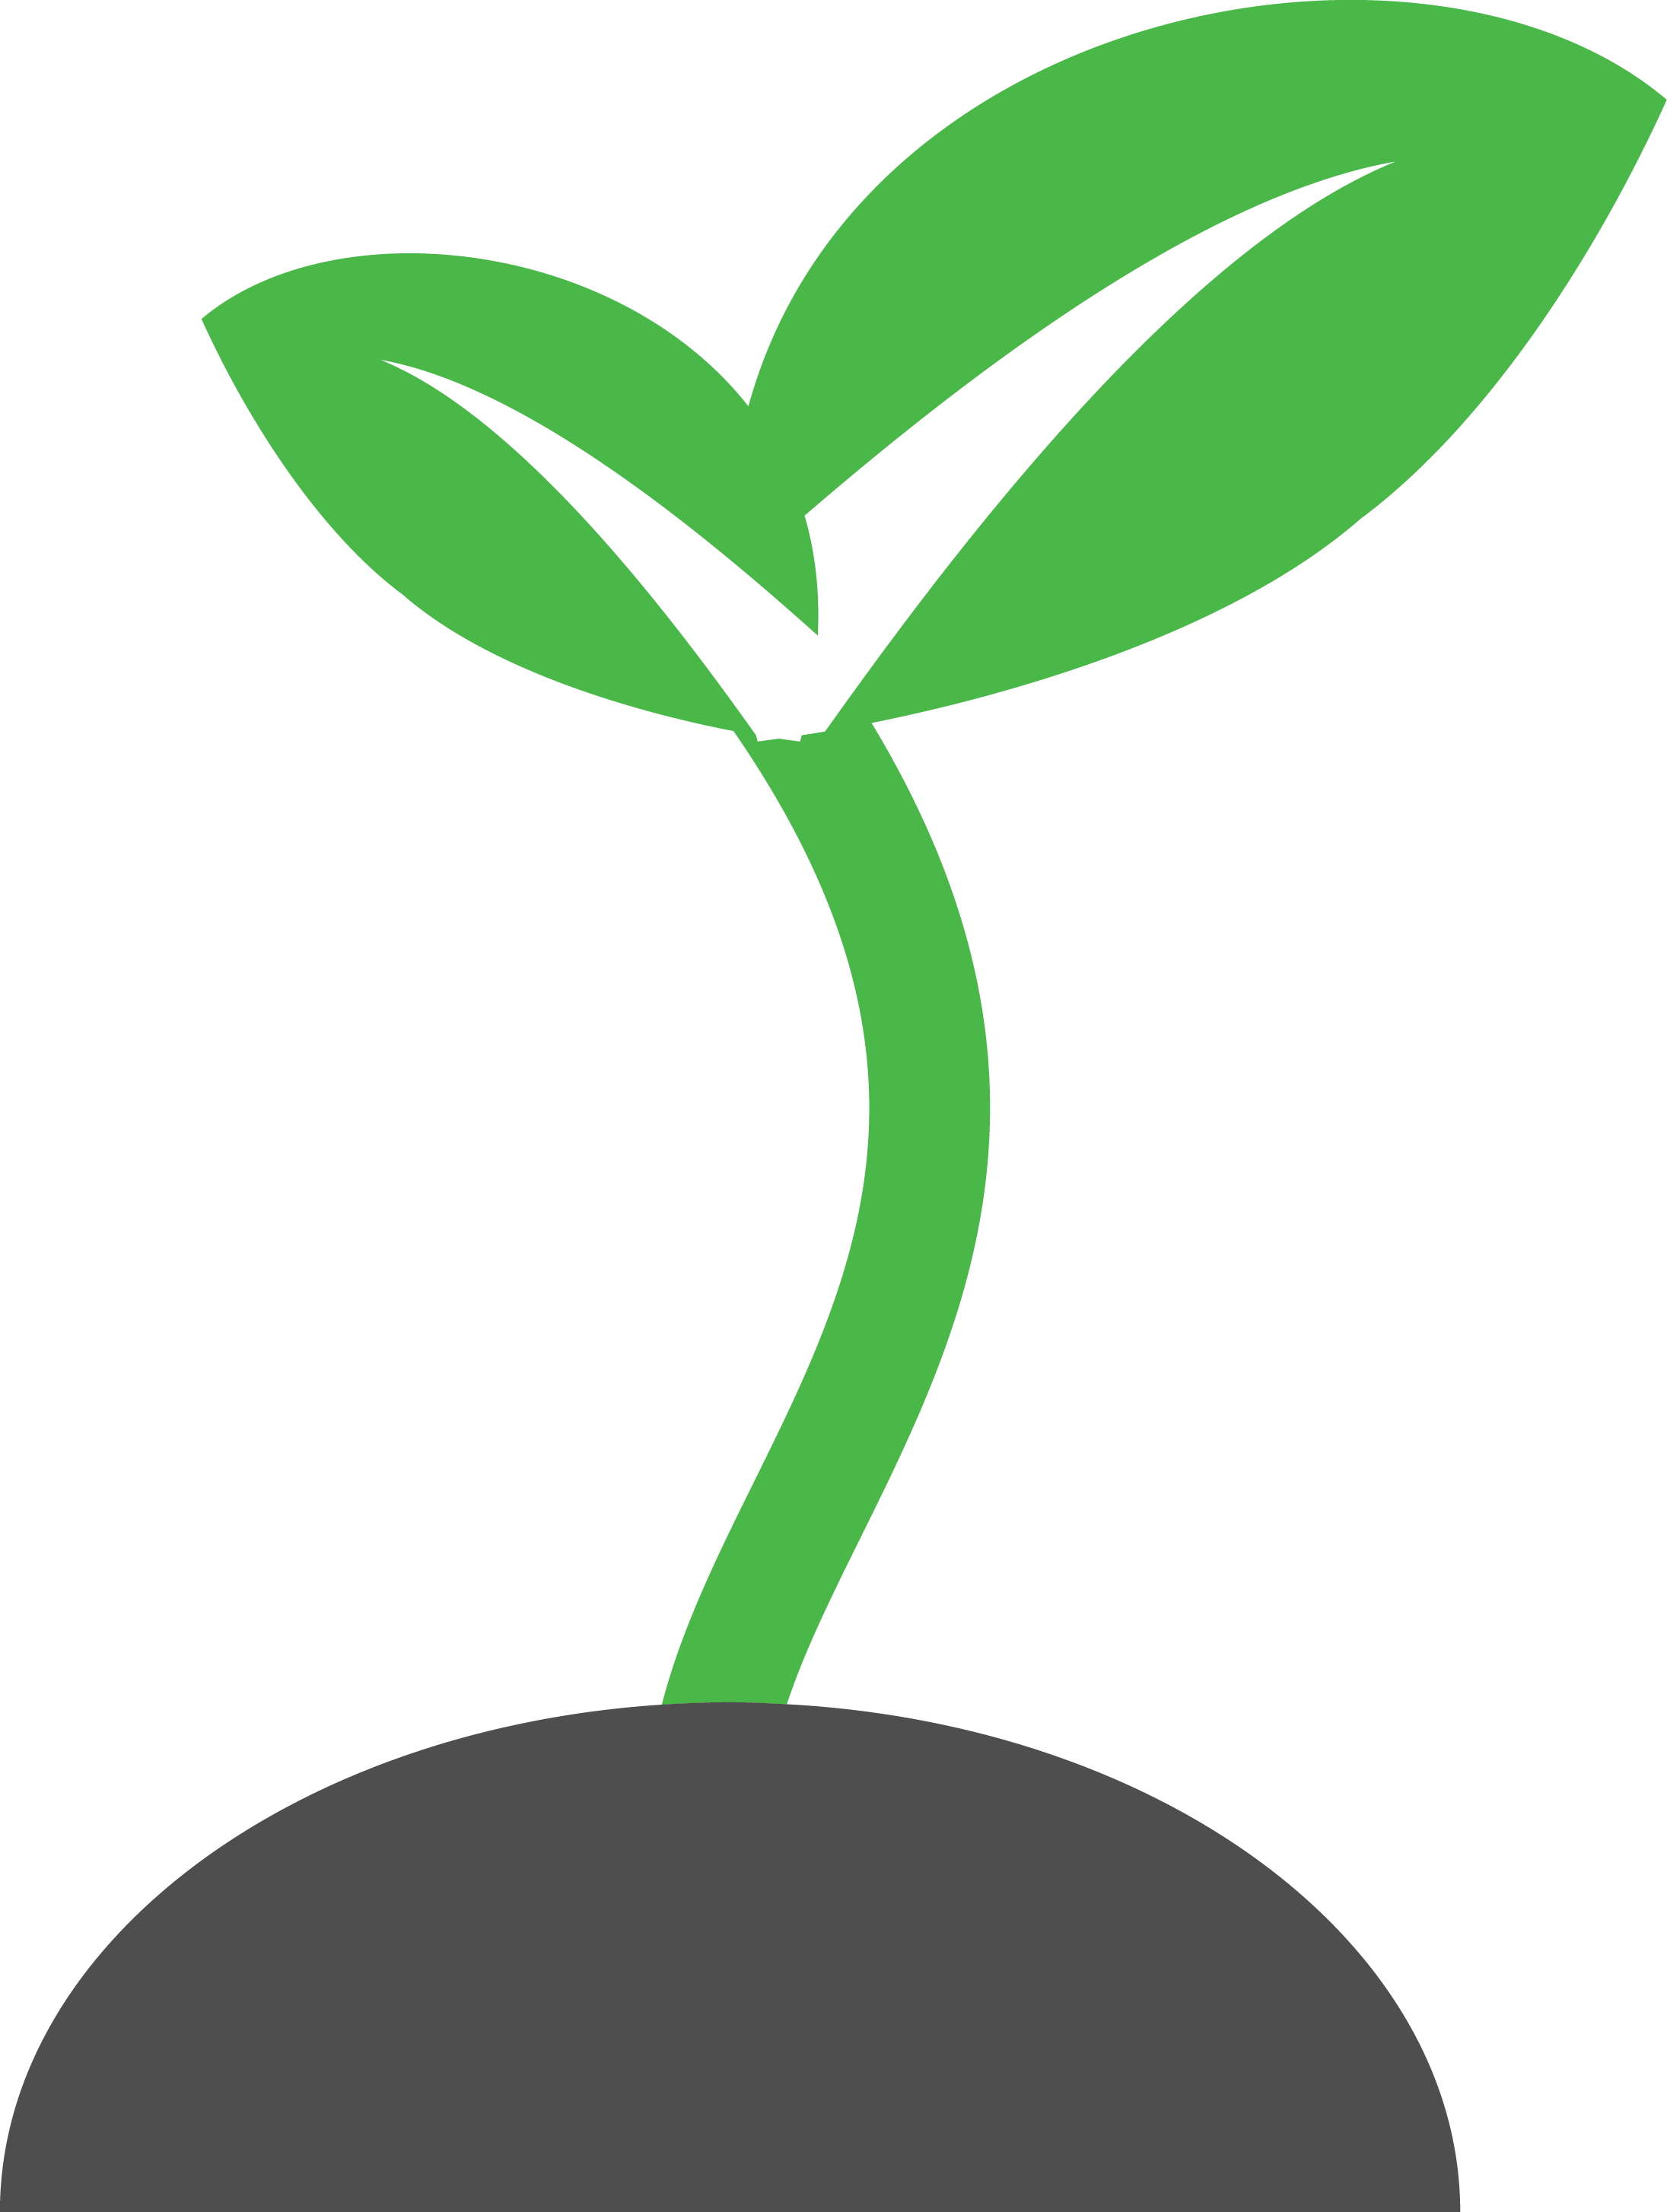 Renovation as a sustainable. Growth clipart sustainability